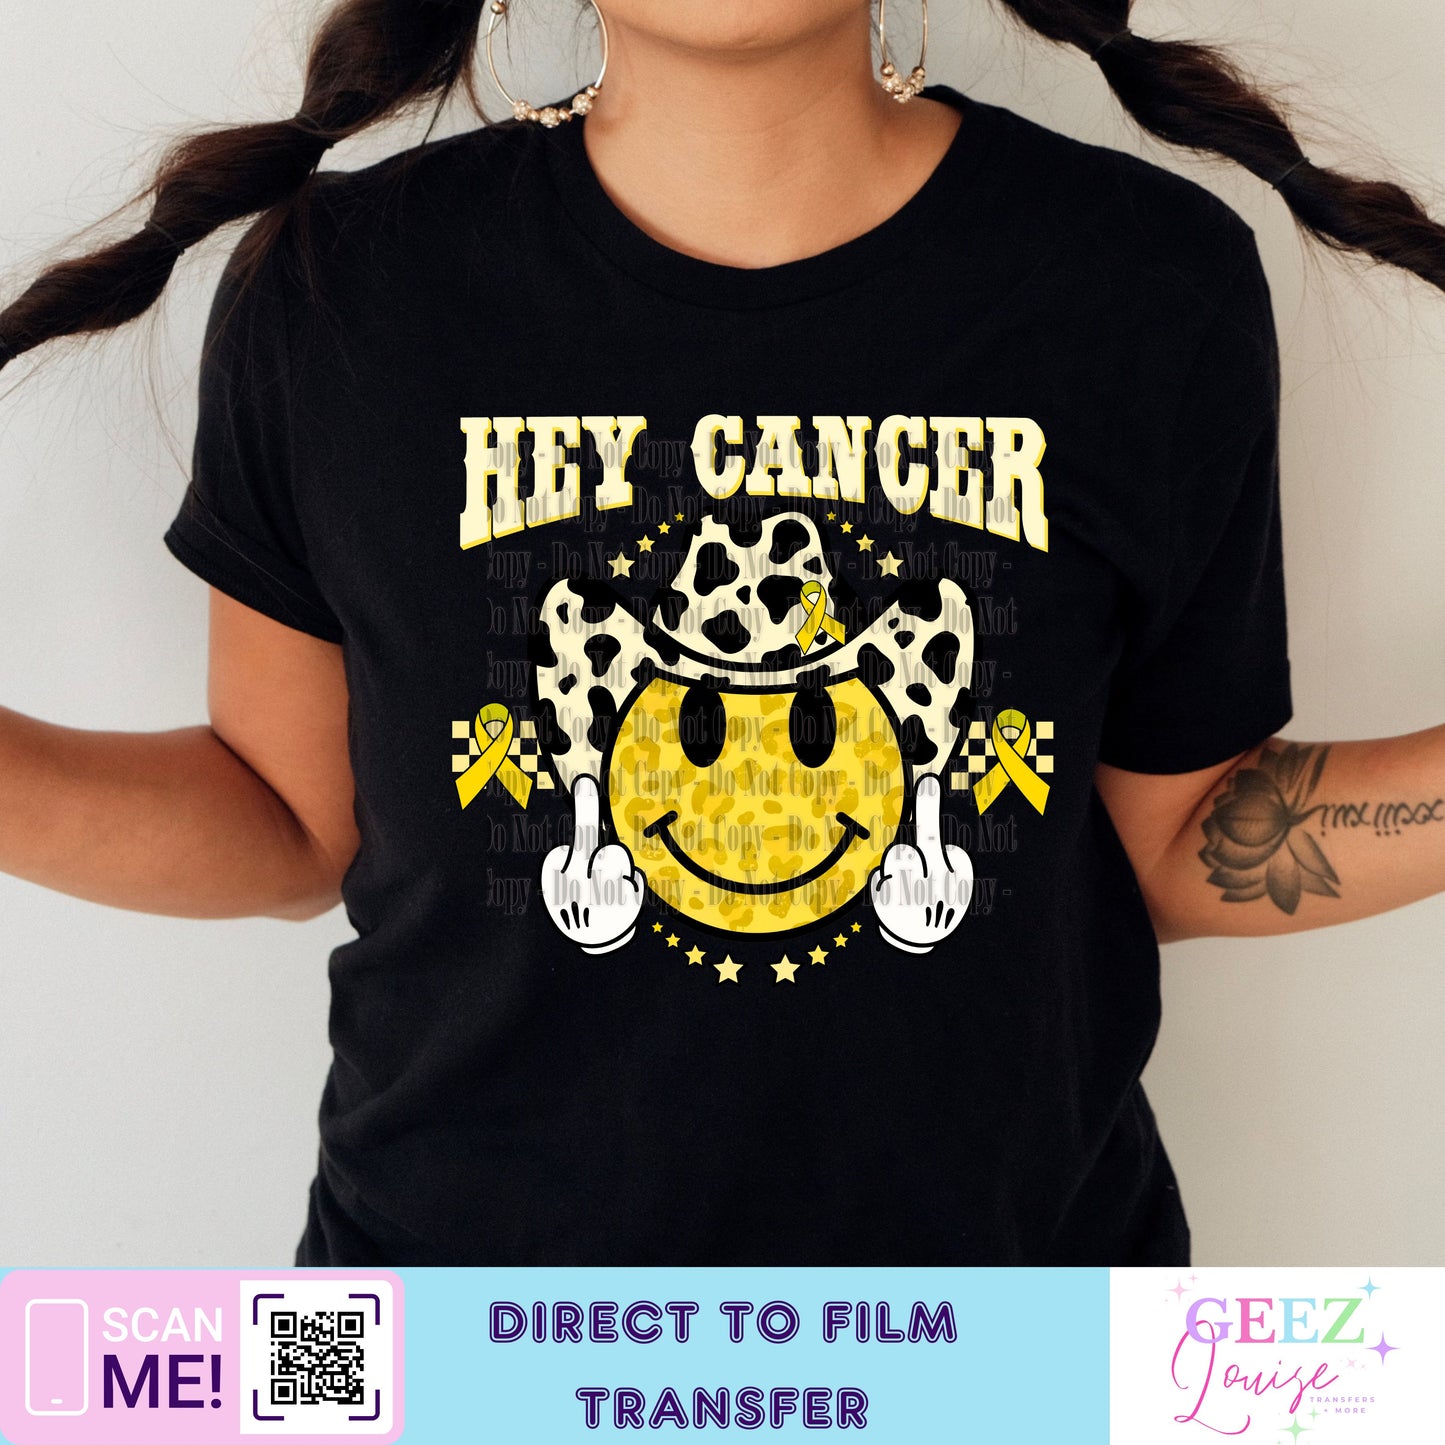 Hey cancer childhood cancer awareness - Direct to Film Transfer - made to order